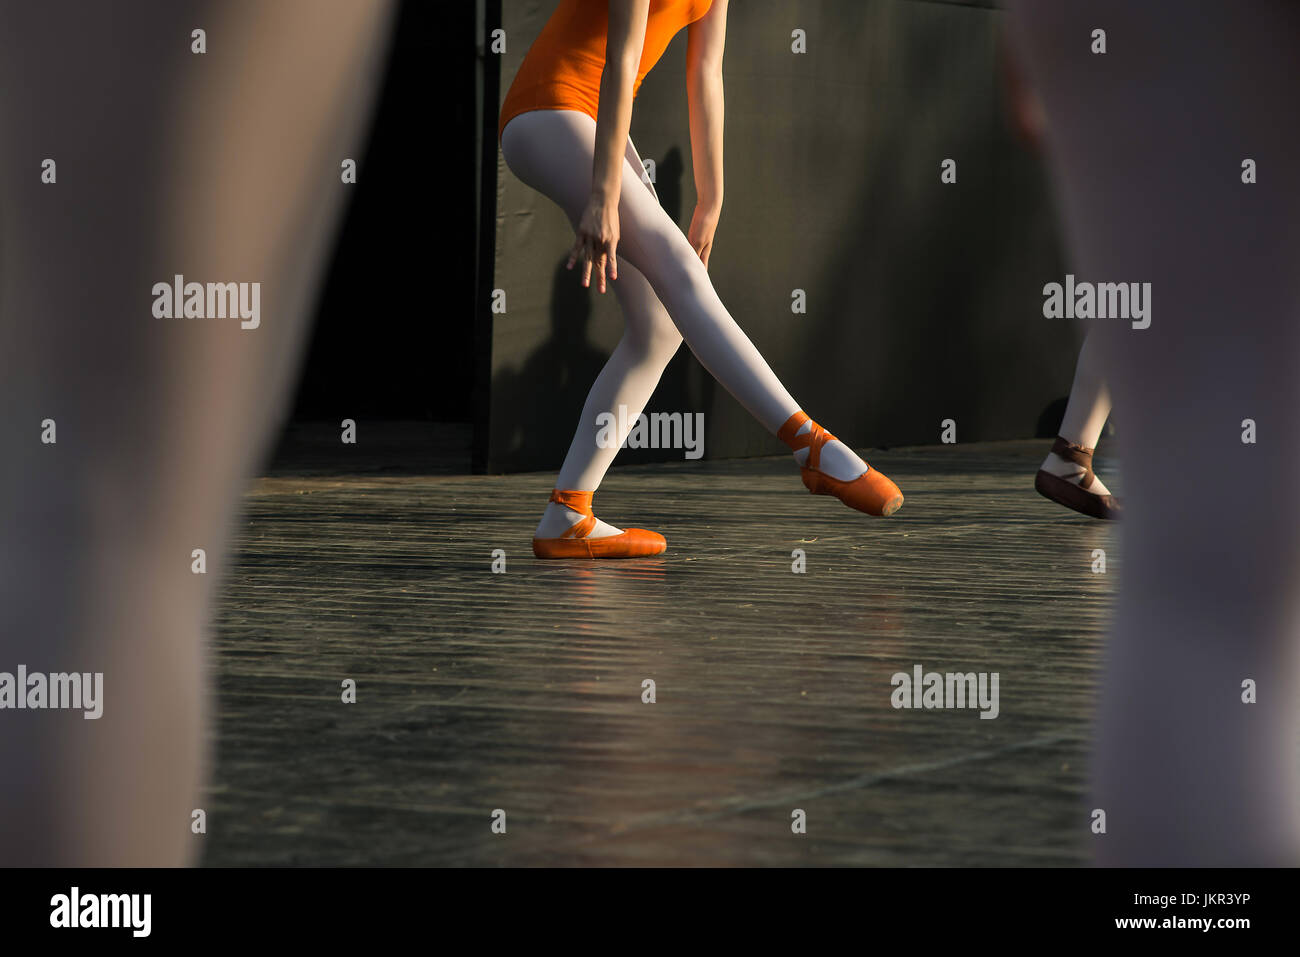 Ballerina feet dancing on ballet shoes on stage during a performance. Stock Photo